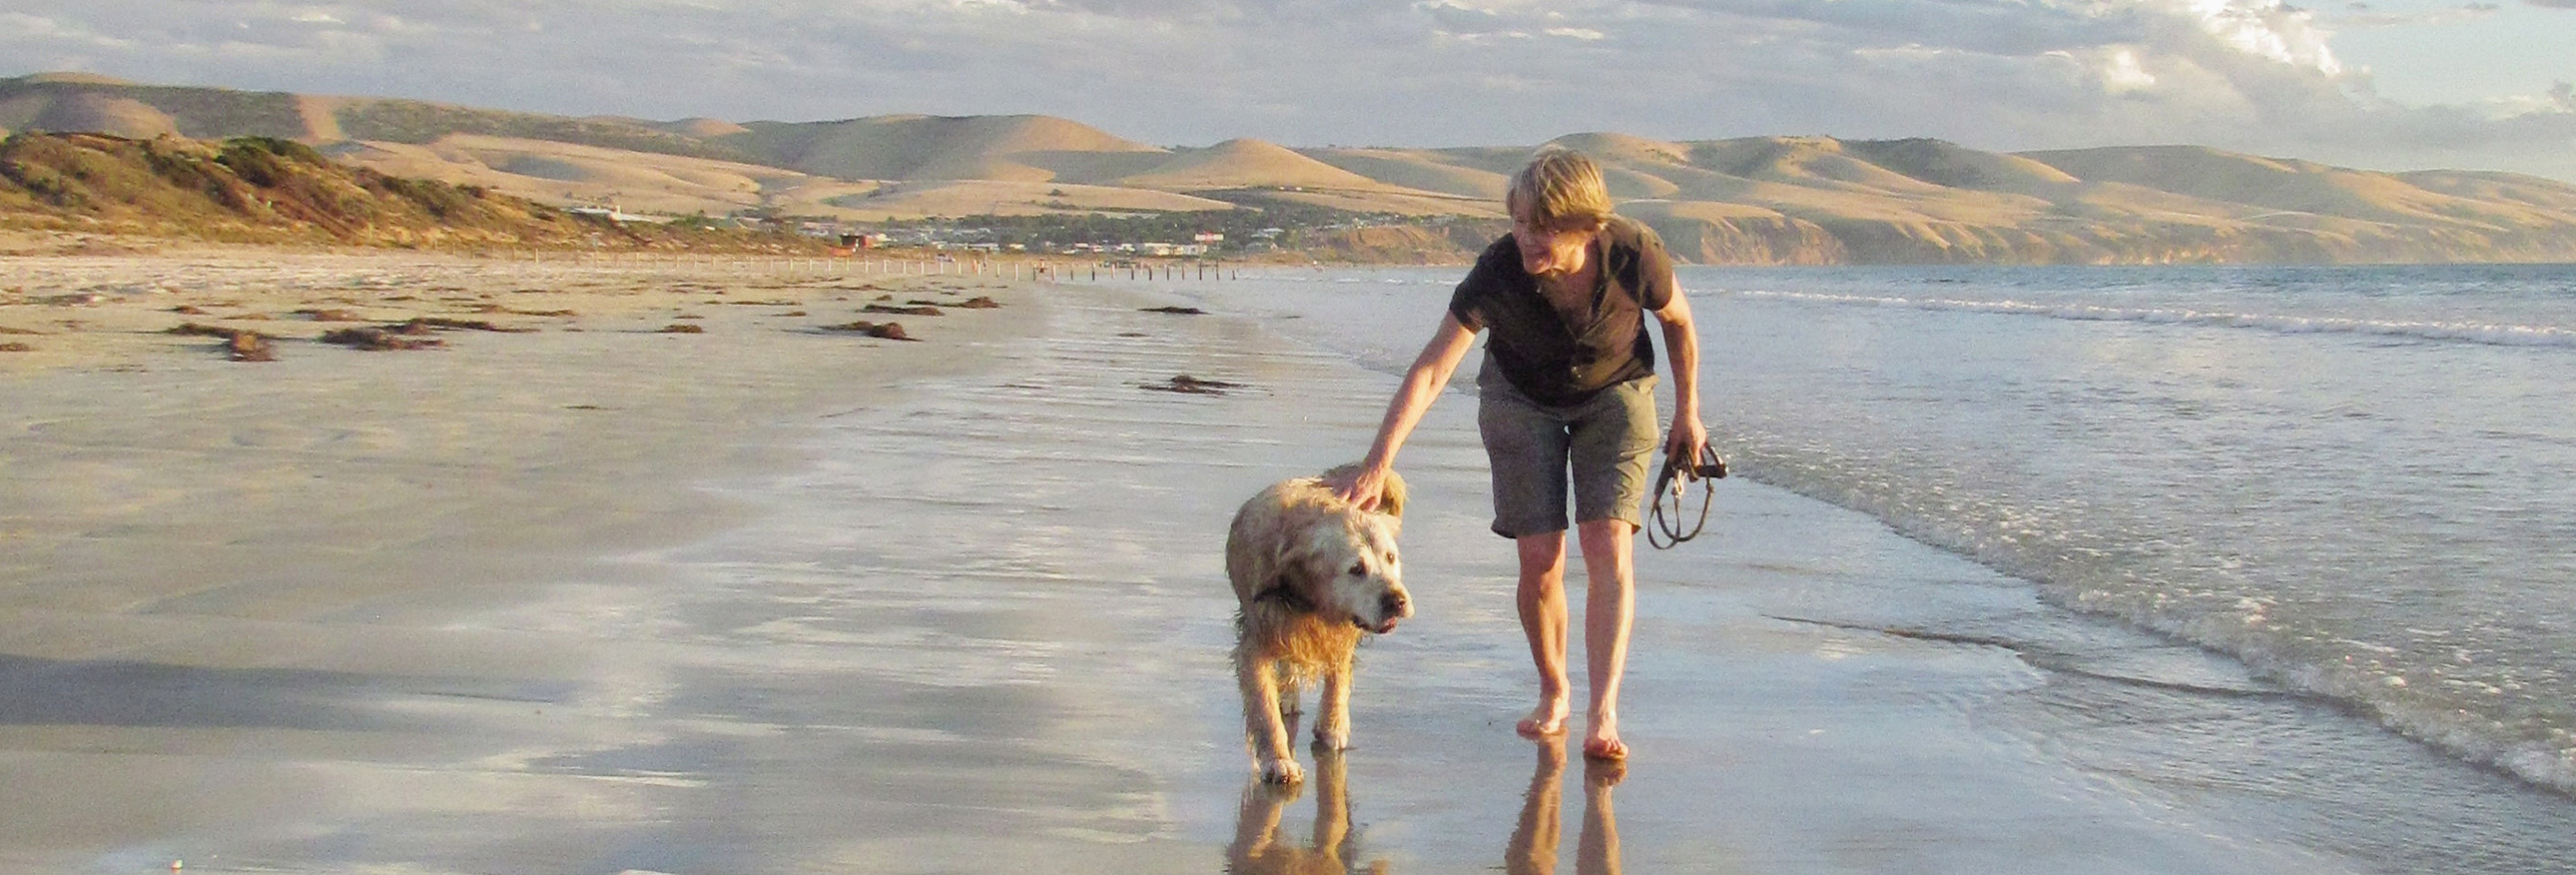 woman and dog walking on the beach